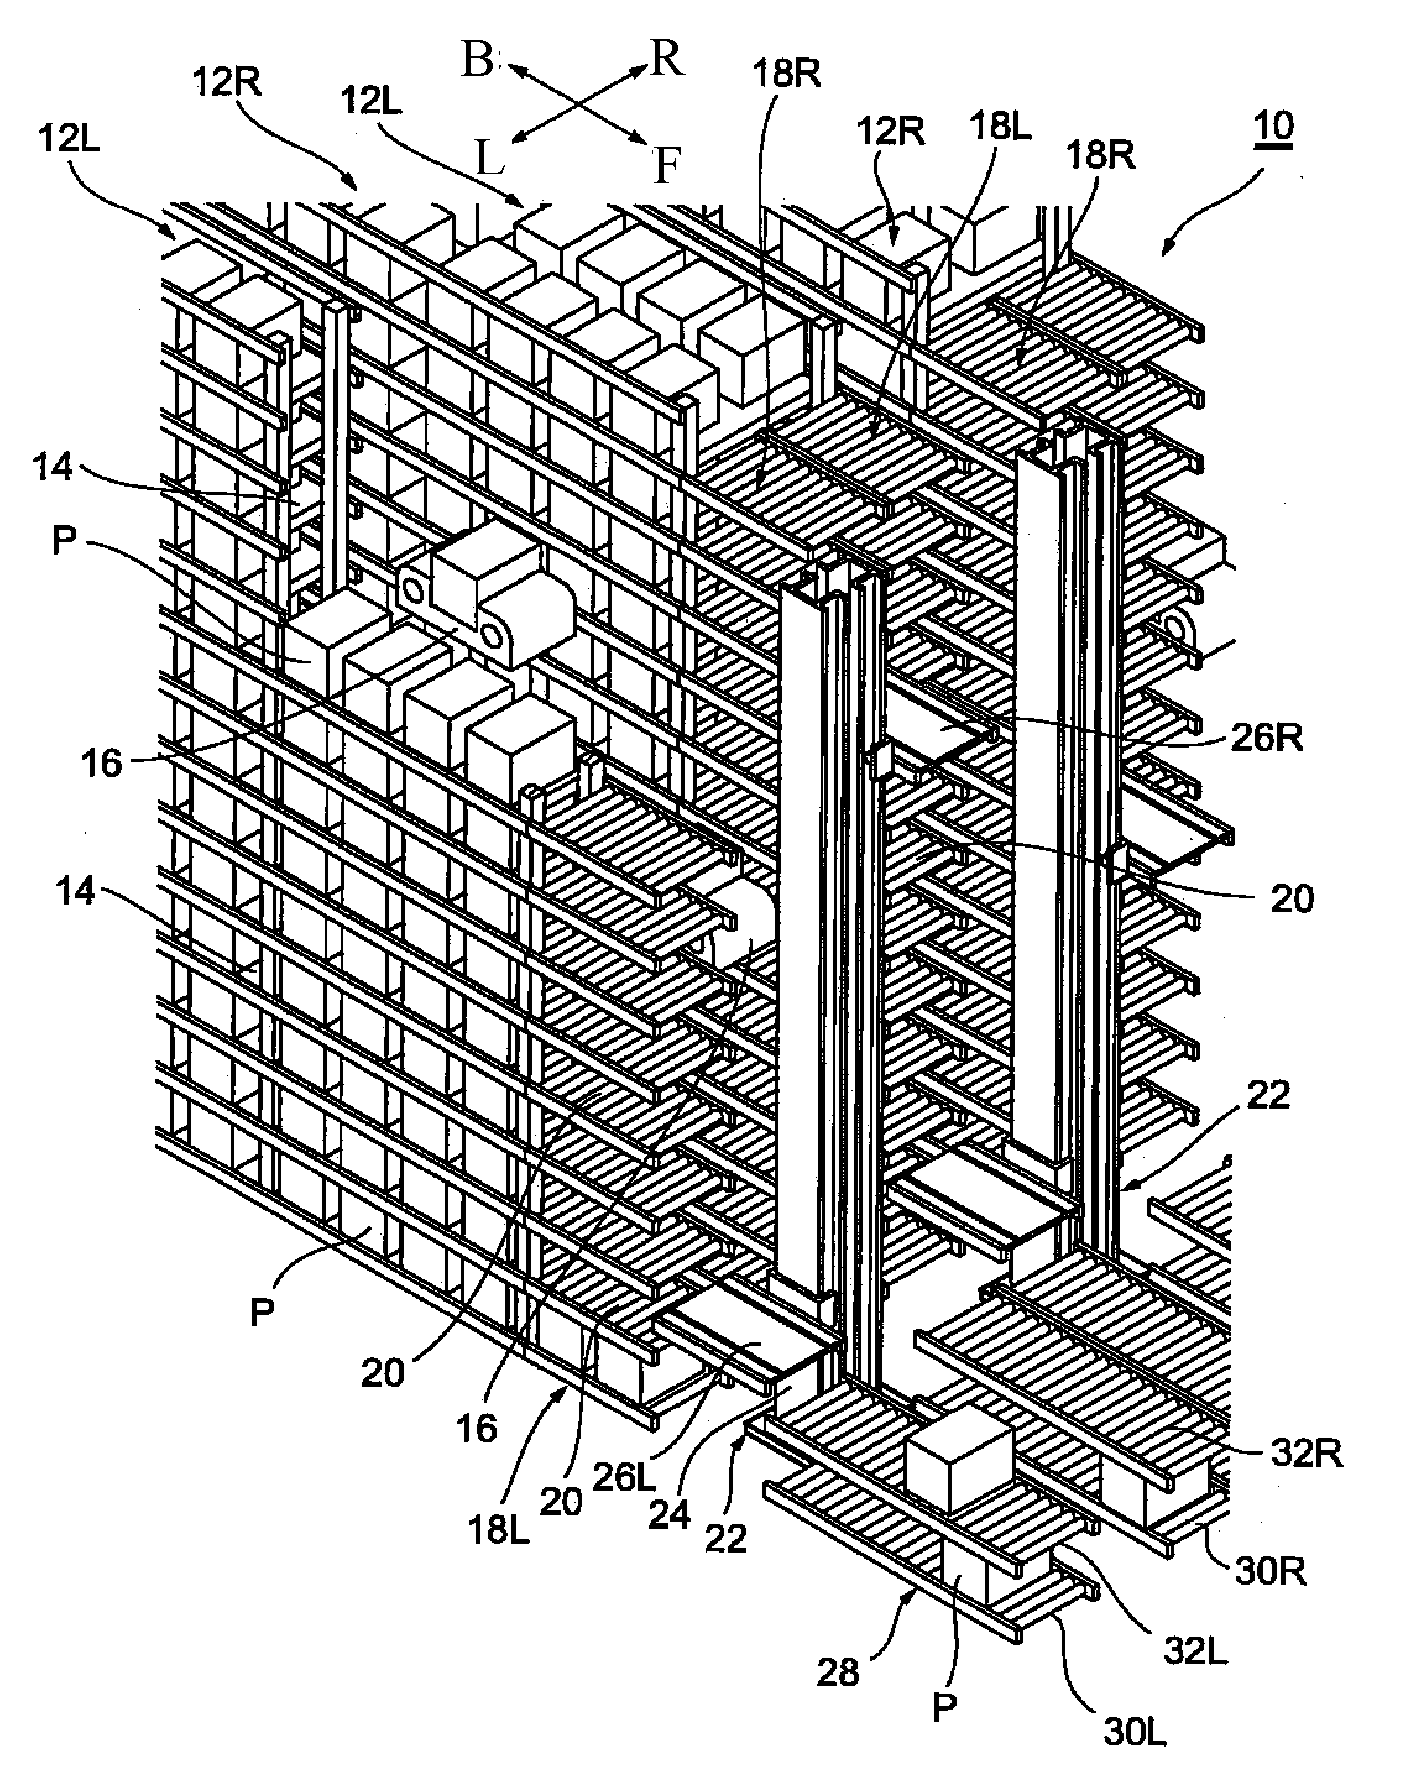 Automated three dimensional warehouse